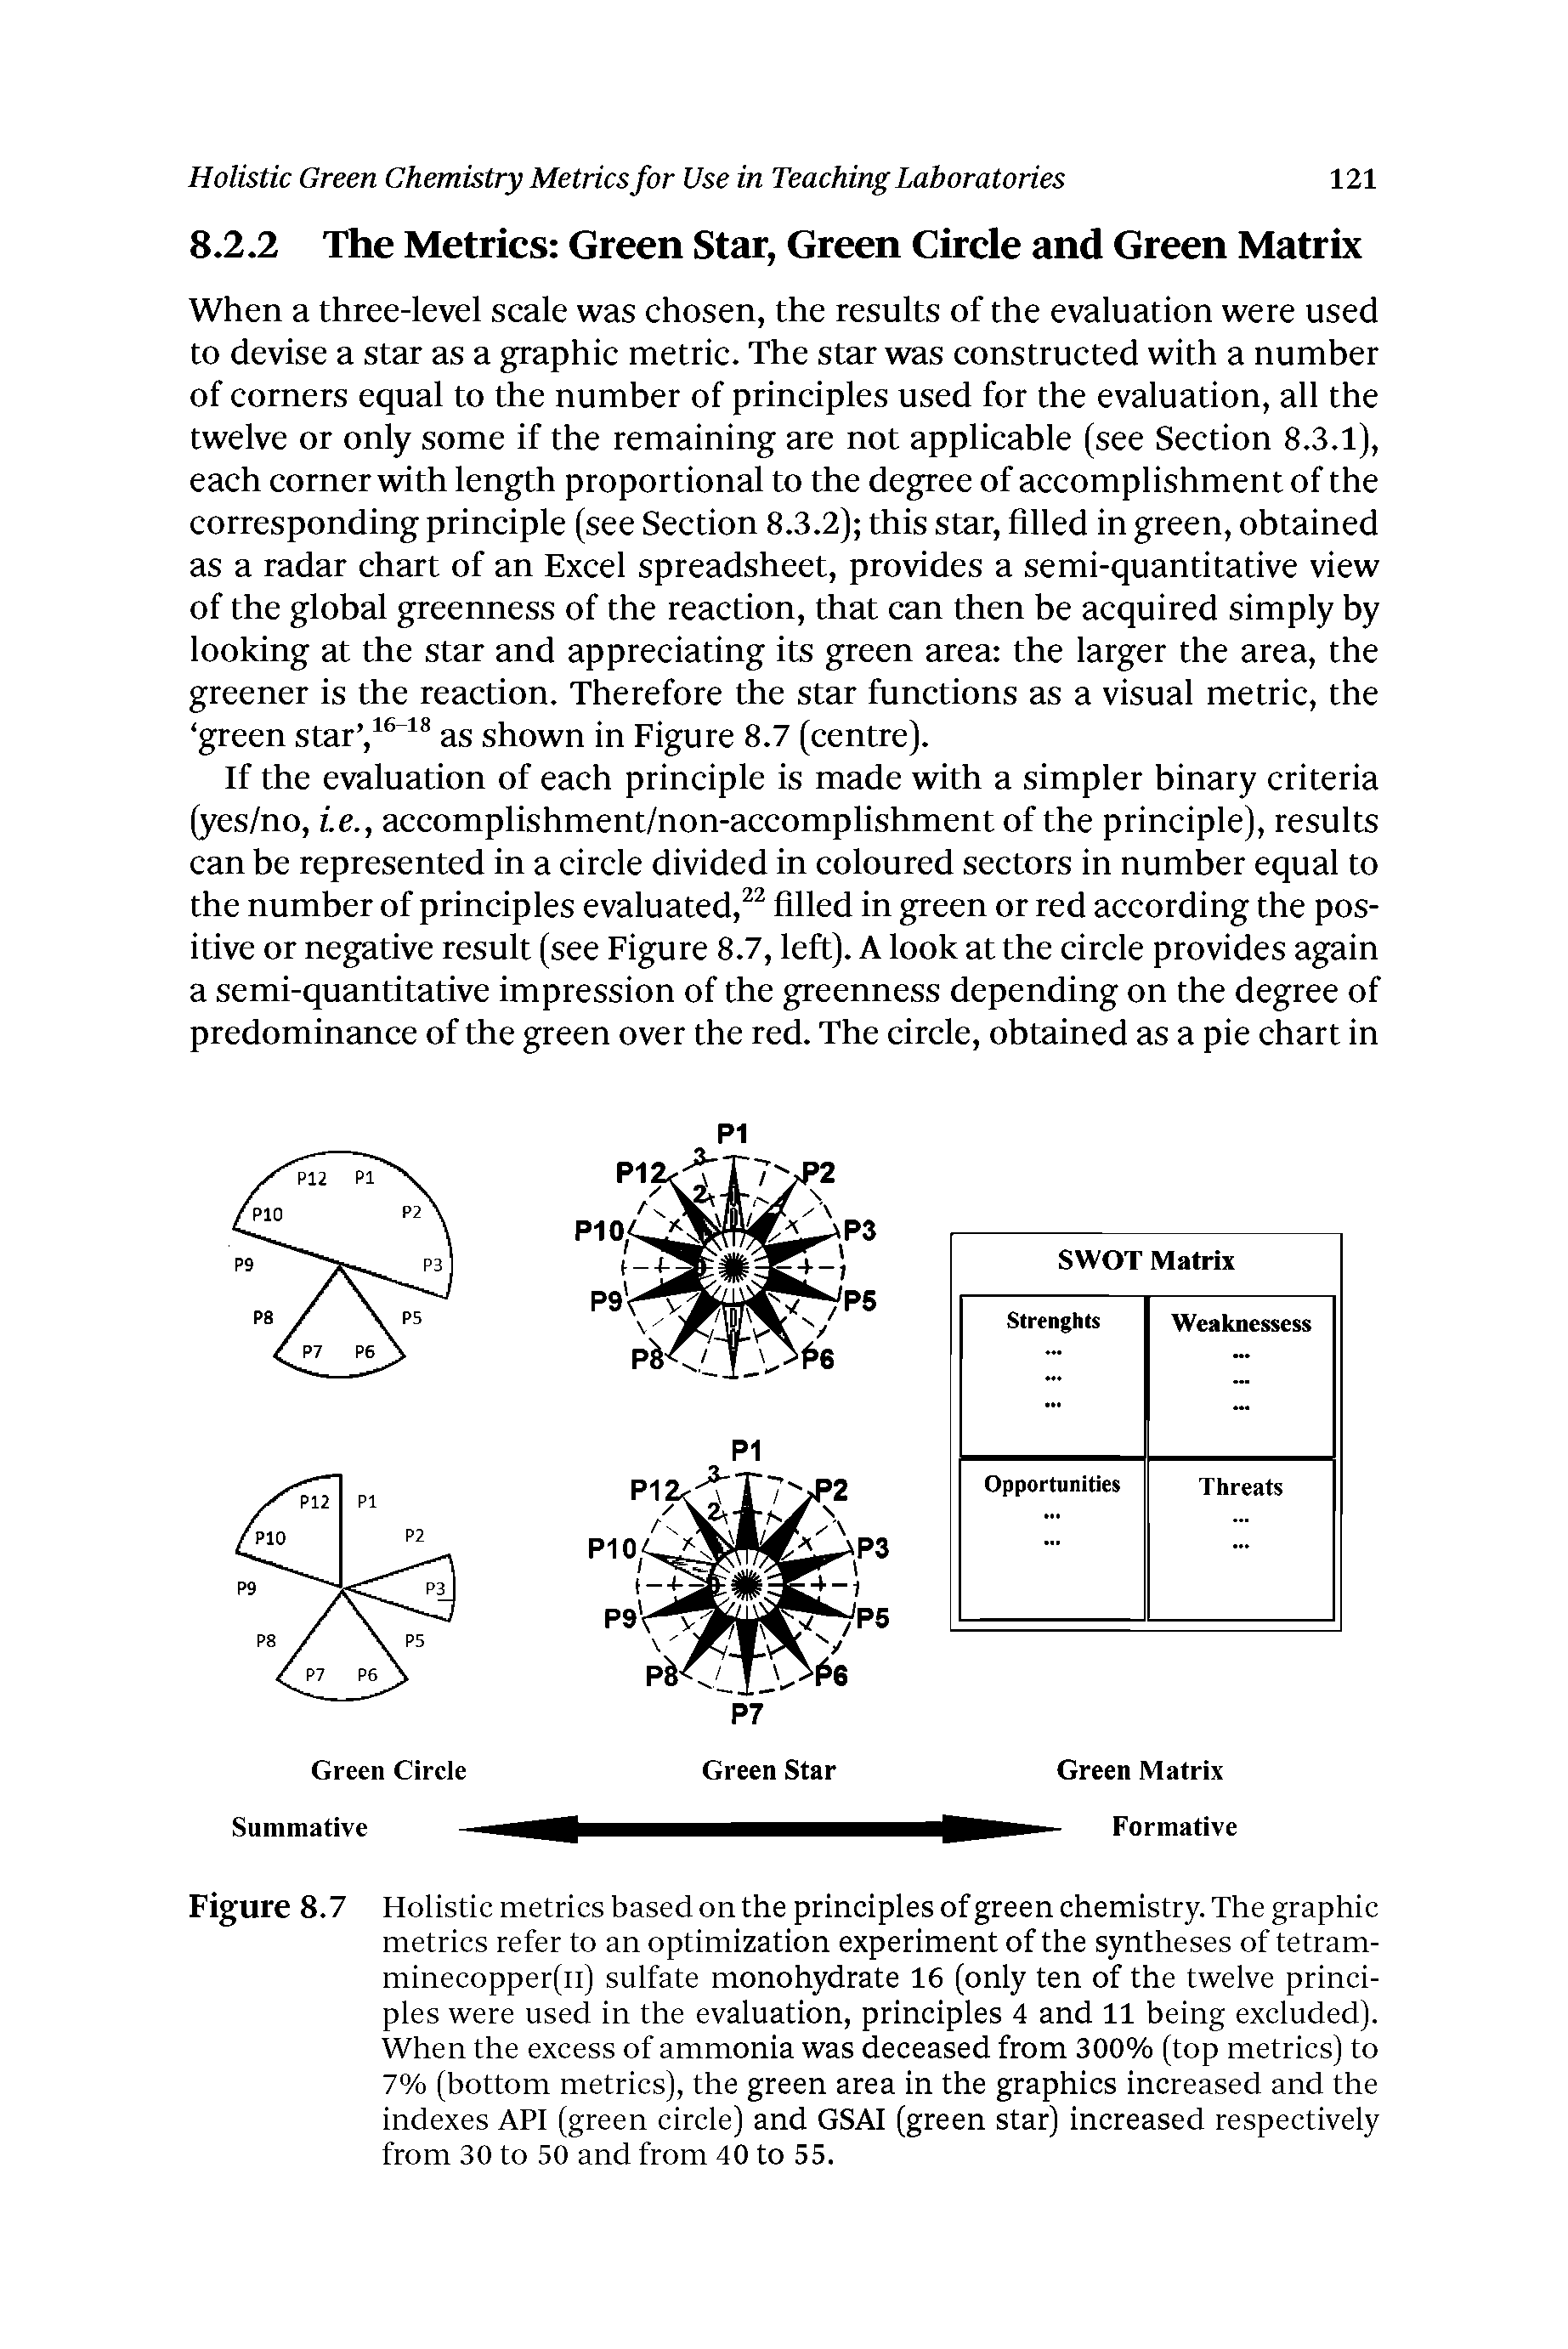 Figure 8.7 Holistic metrics based on the principles of green chemistry. The graphic metrics refer to an optimization experiment of the syntheses of tetram-minecopper(ii) sulfate monohydrate 16 (only ten of the twelve principles were used in the evaluation, principles 4 and 11 being excluded). When the excess of ammonia was deceased from 300% (top metrics) to 7% (bottom metrics), the green area in the graphics increased and the indexes API (green circle) and GSAI (green star) increased respectively from 30 to 50 and from 40 to 55.